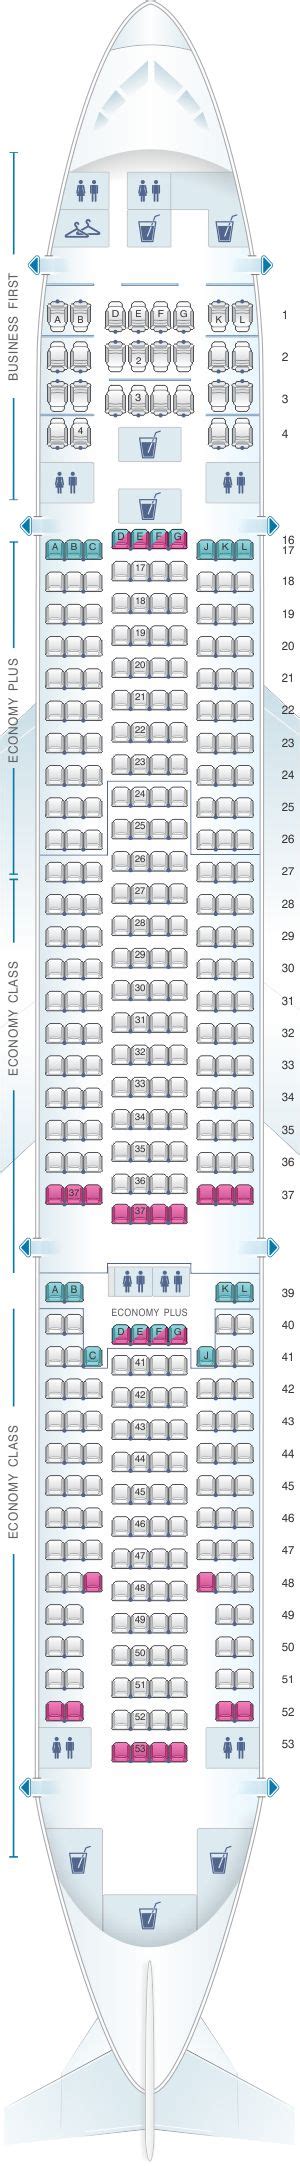 Seat Map United Airlines Boeing B777 200 777 Version 5 United